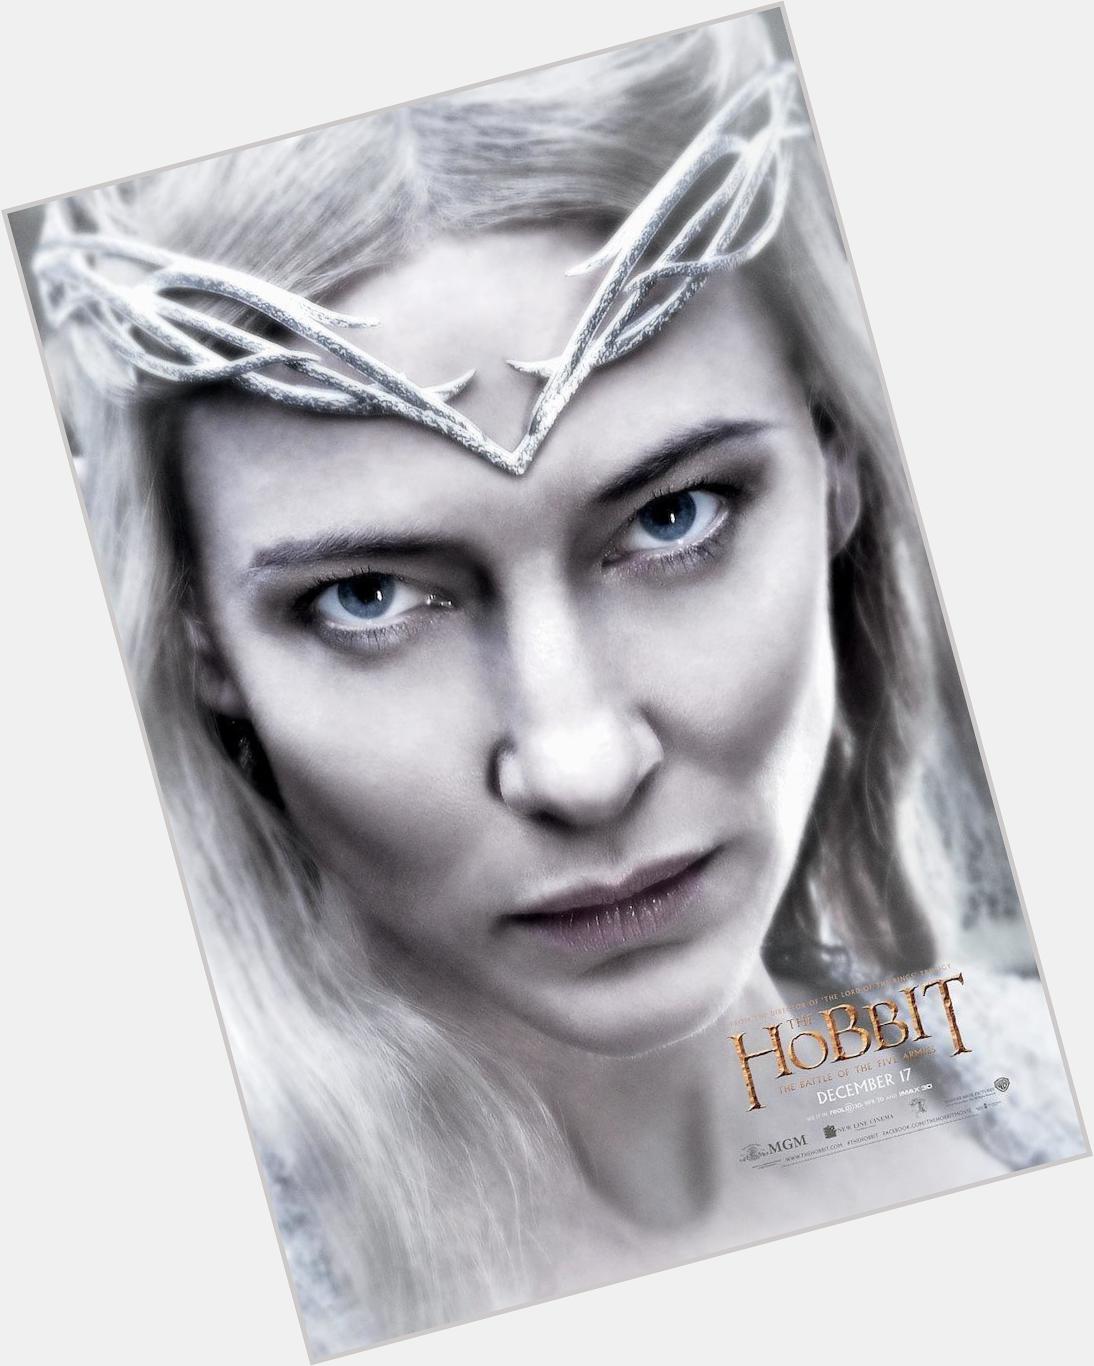 HAPPY BIRTHDAY to CATE BLANCHETT!!!!
always and forever the elven queen   